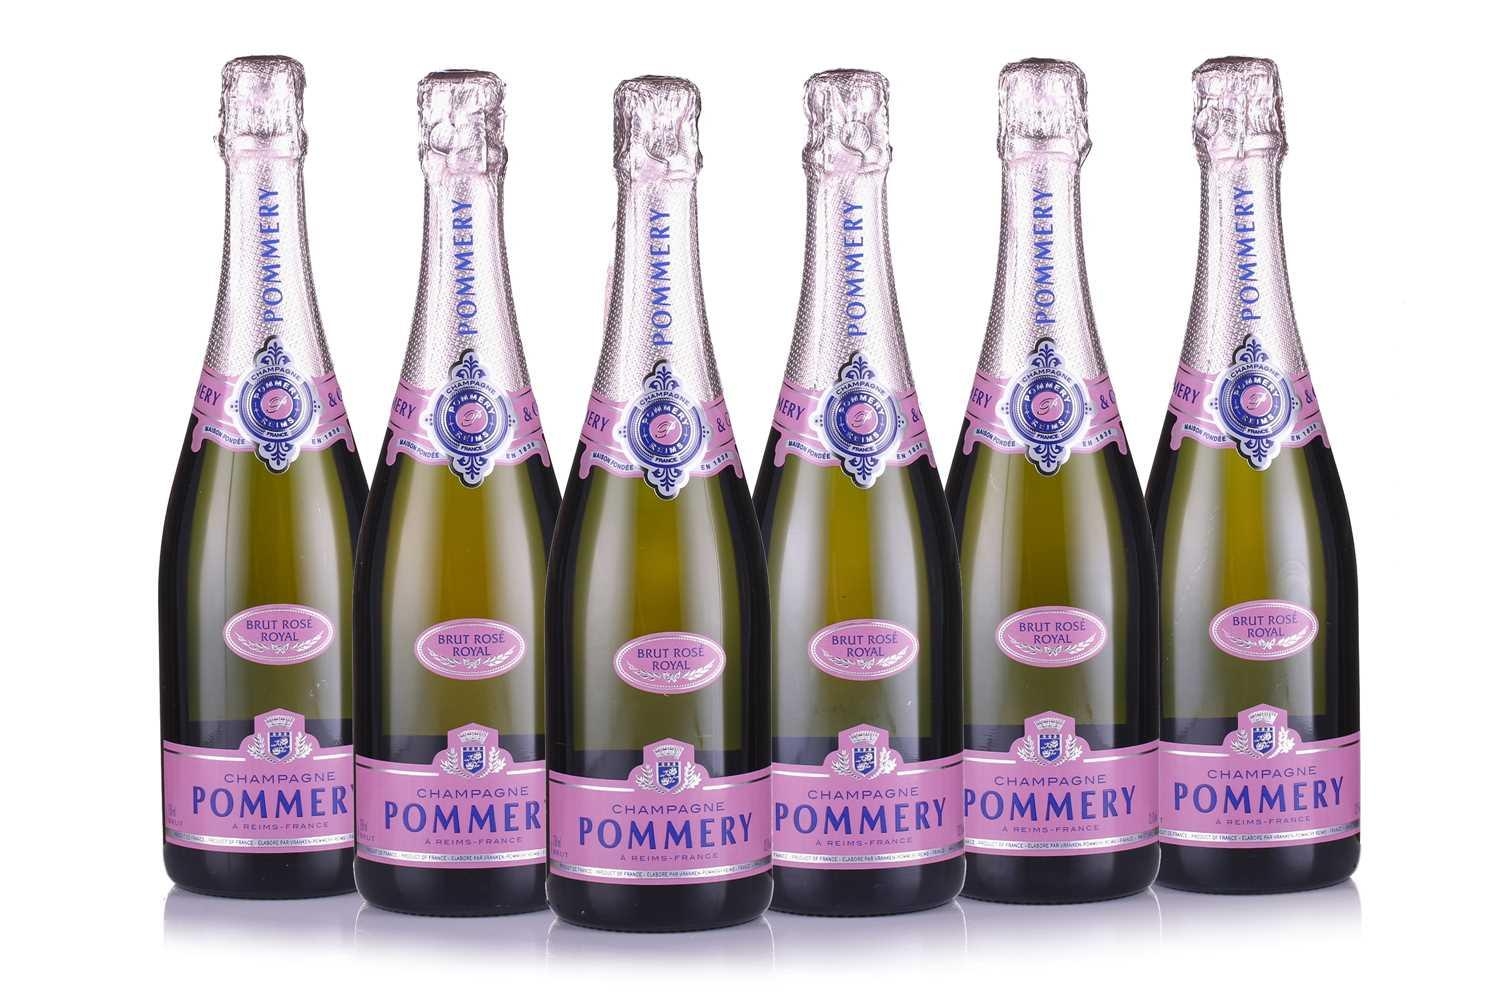 Six bottles of Pommery cartons. Royal Champagne, in Qty: Brut Rose (6)